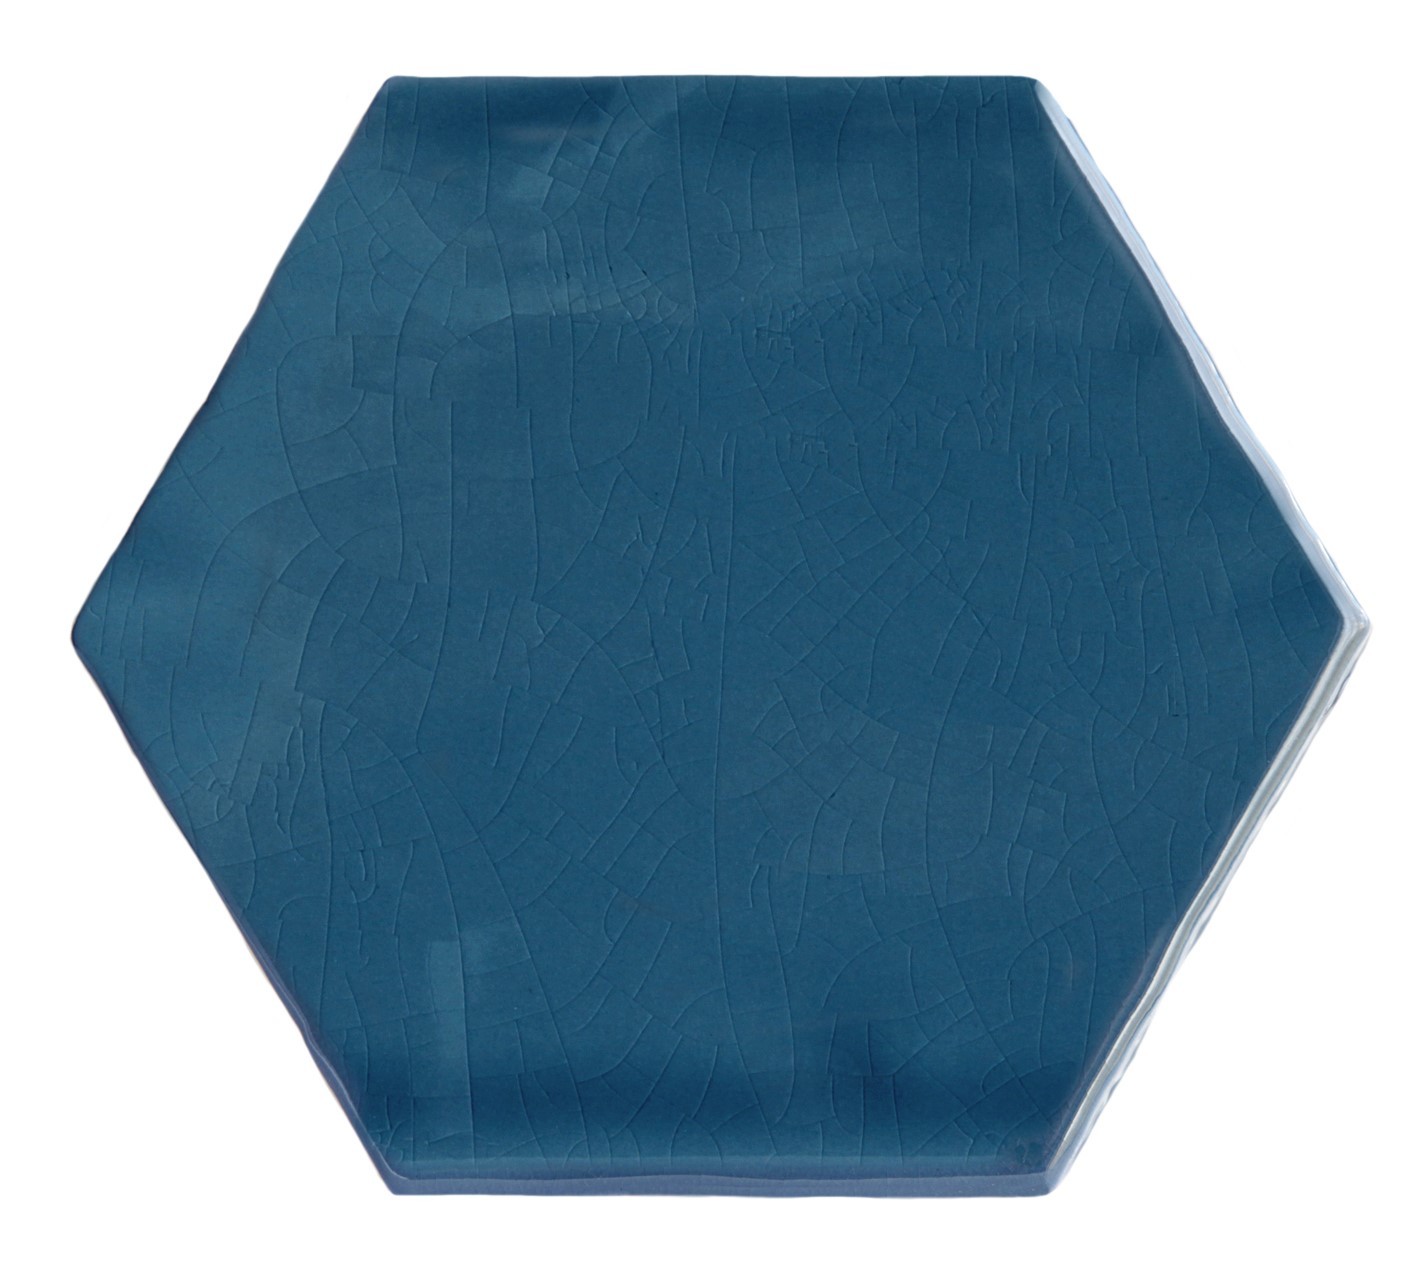 Shannon Hexagon Gloss, product variant image